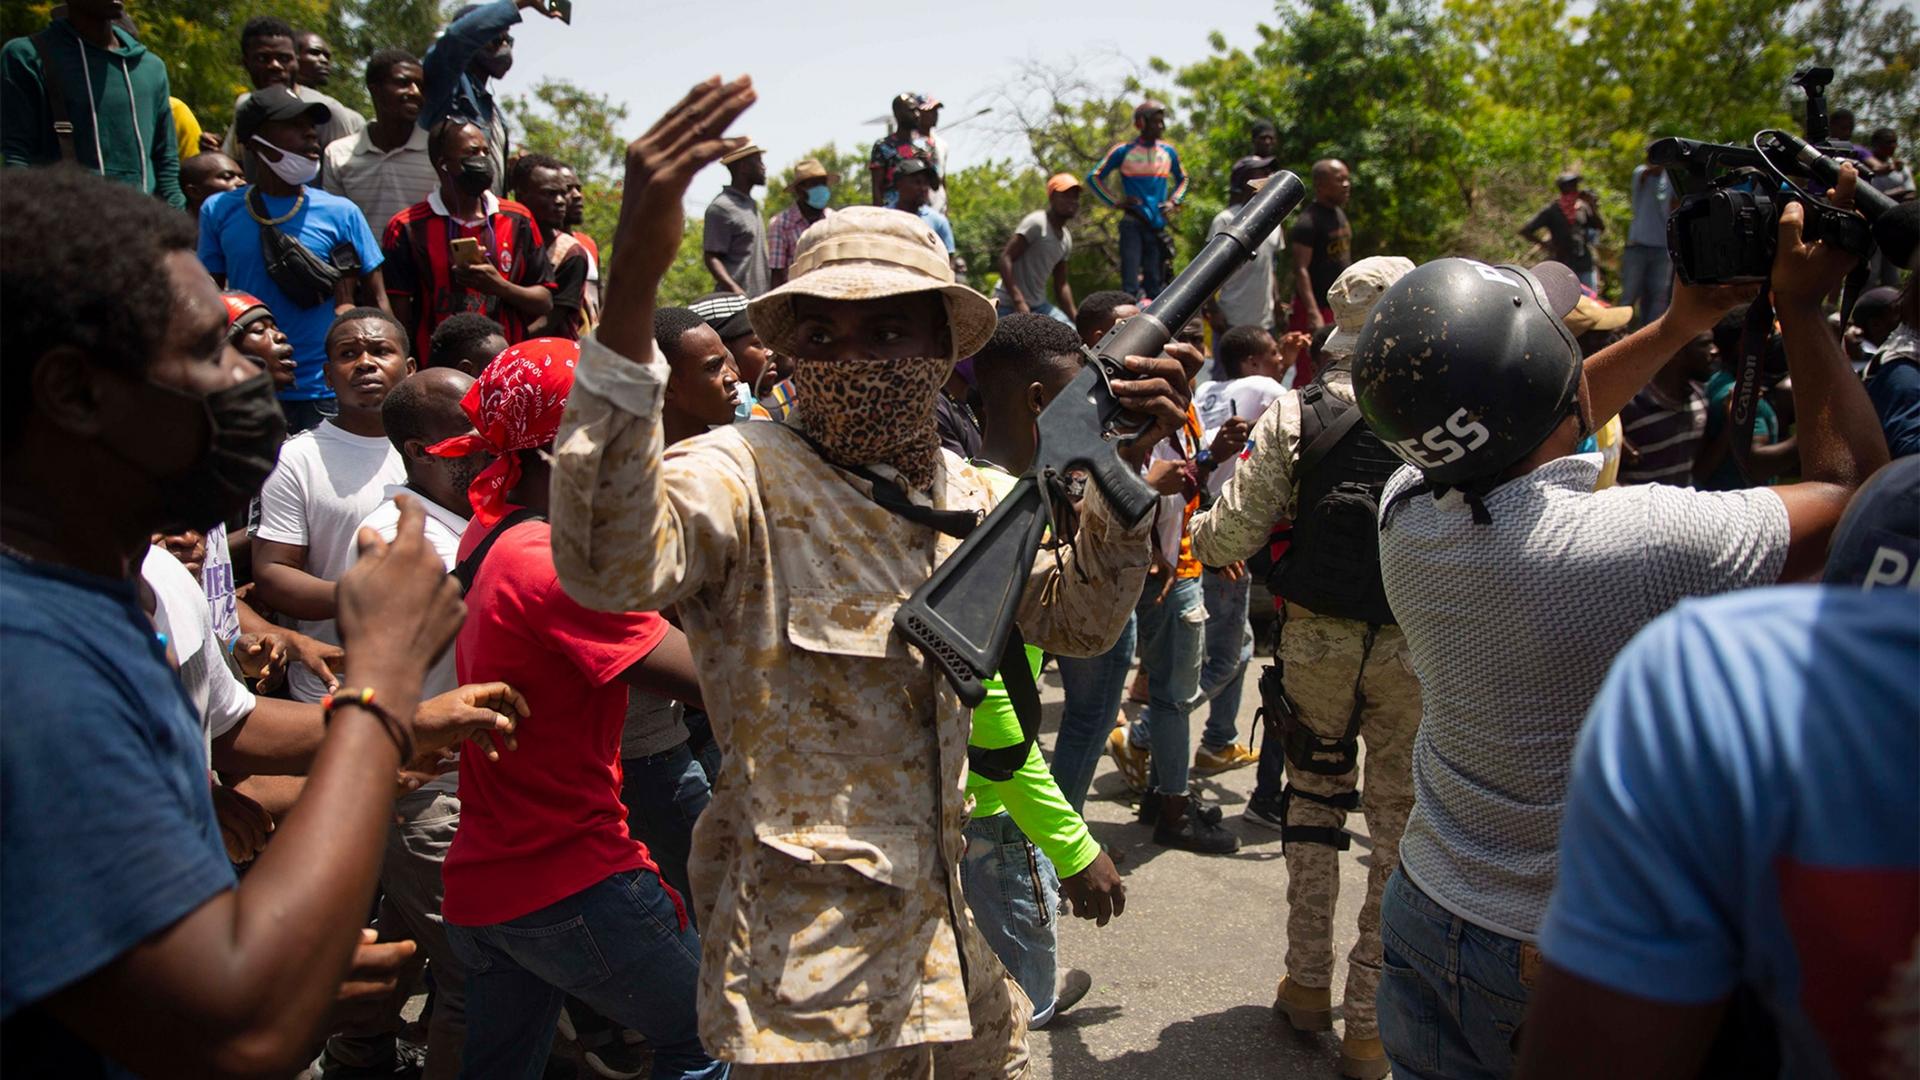 Police in camouflage stand amid a crowd protesting against the assassination of Haitian President Jovenel Moïse